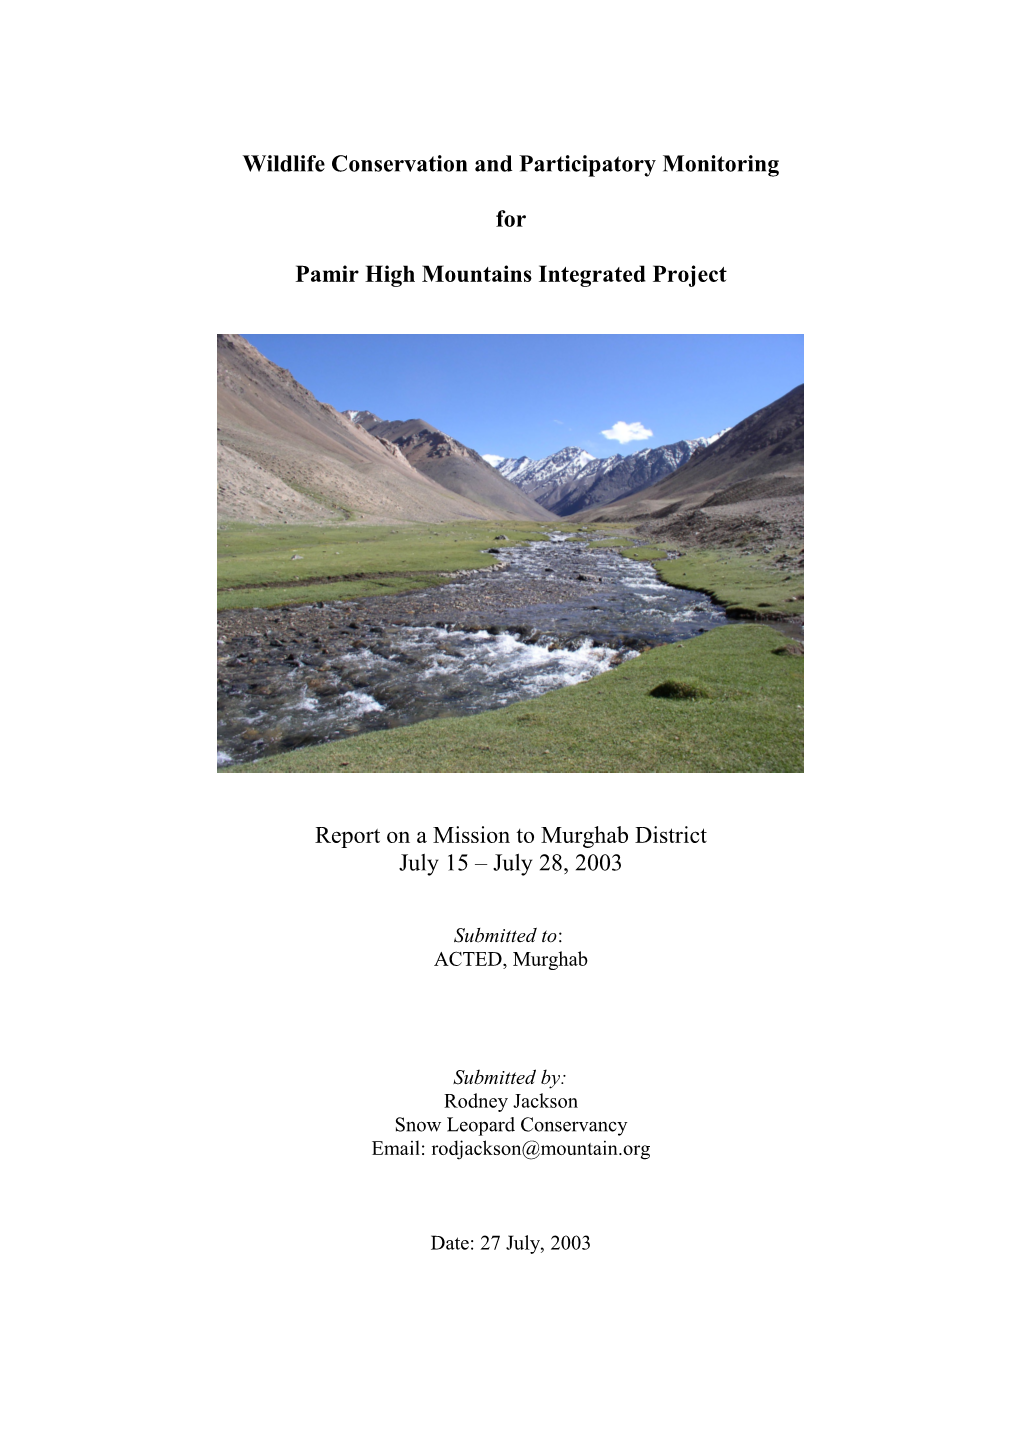 Report on Mission to Murghab